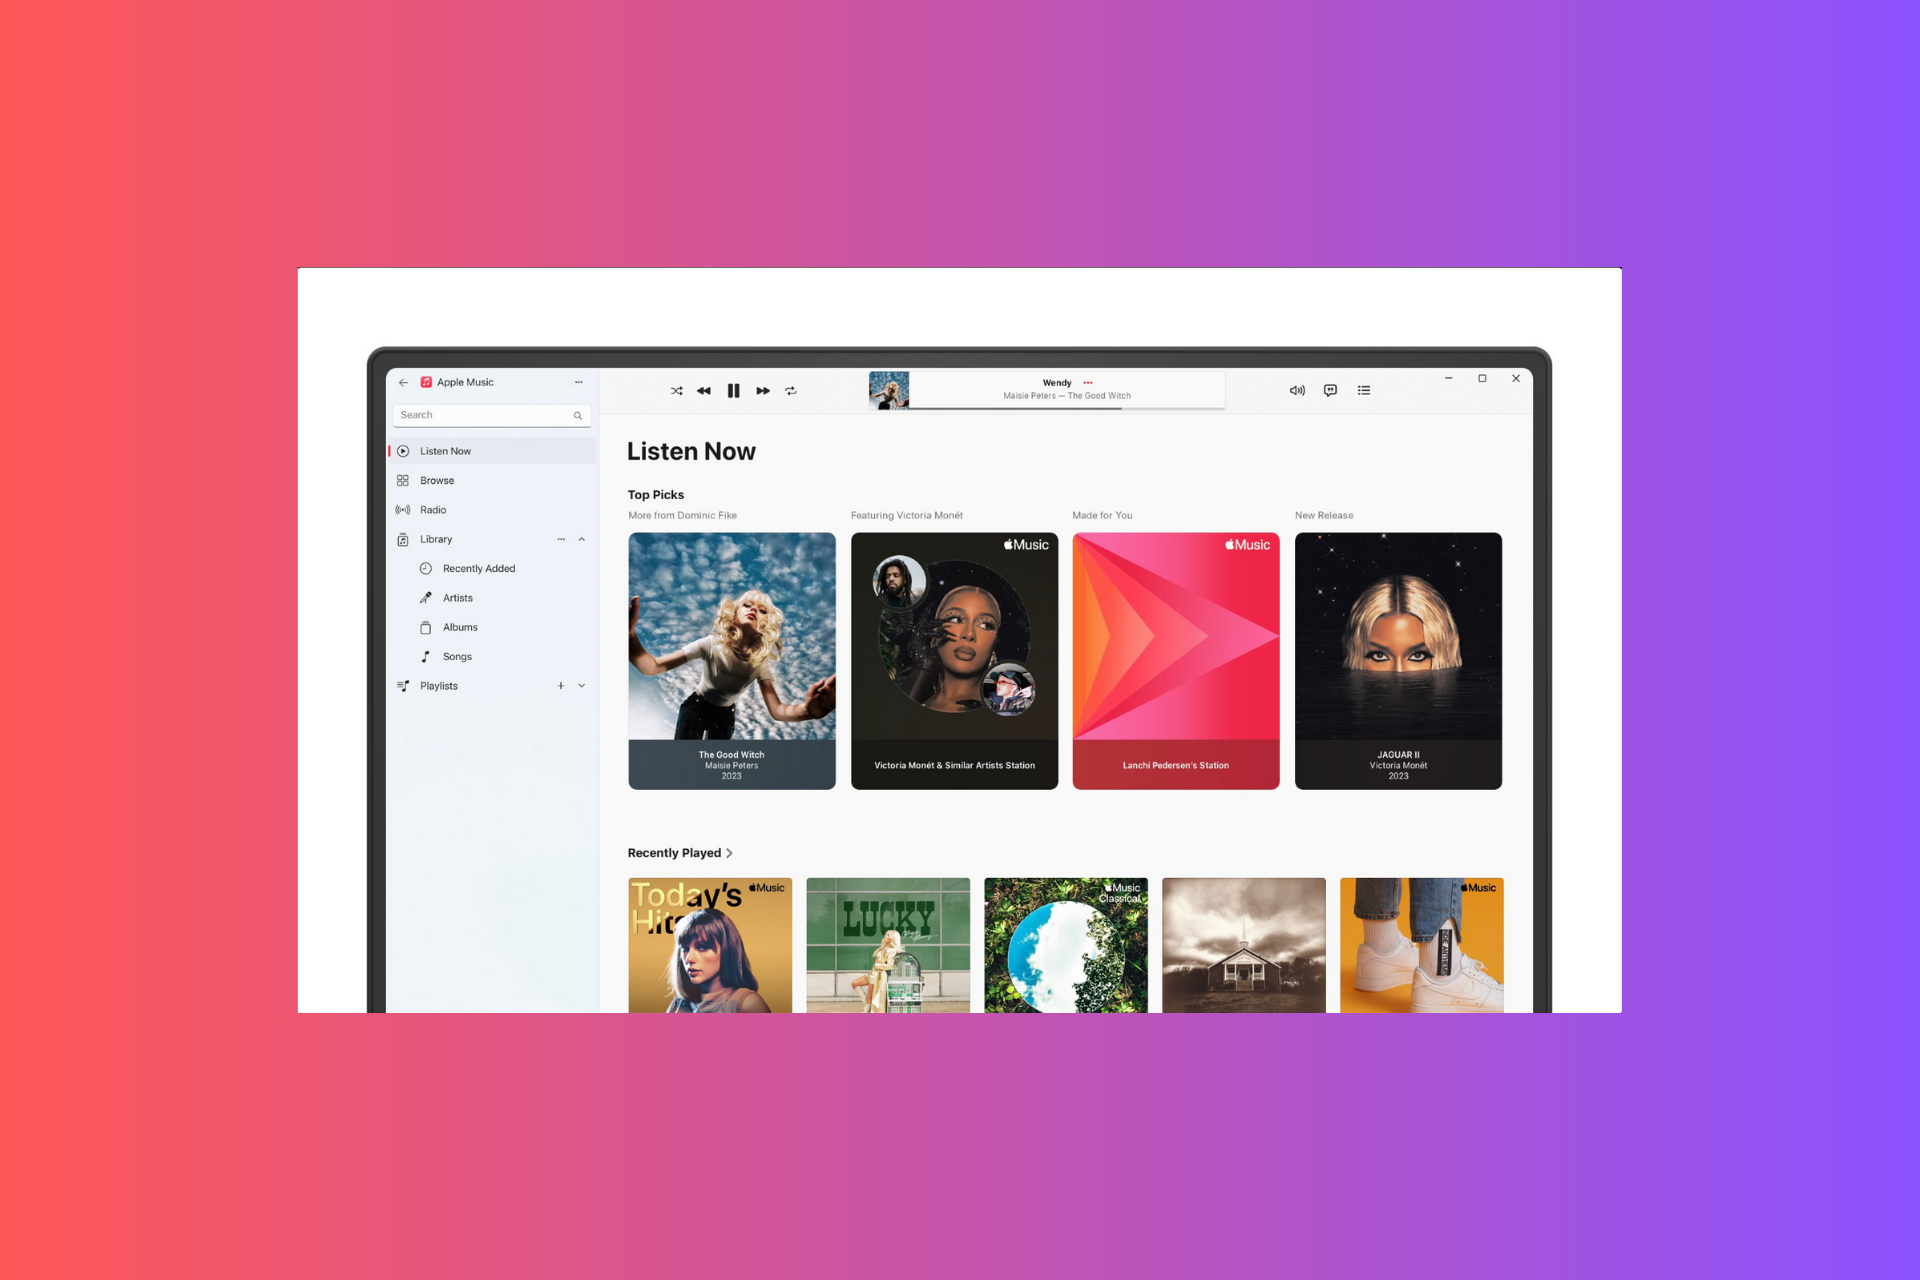 Moving your content from iTunes for Windows to Apple's new media apps is easy